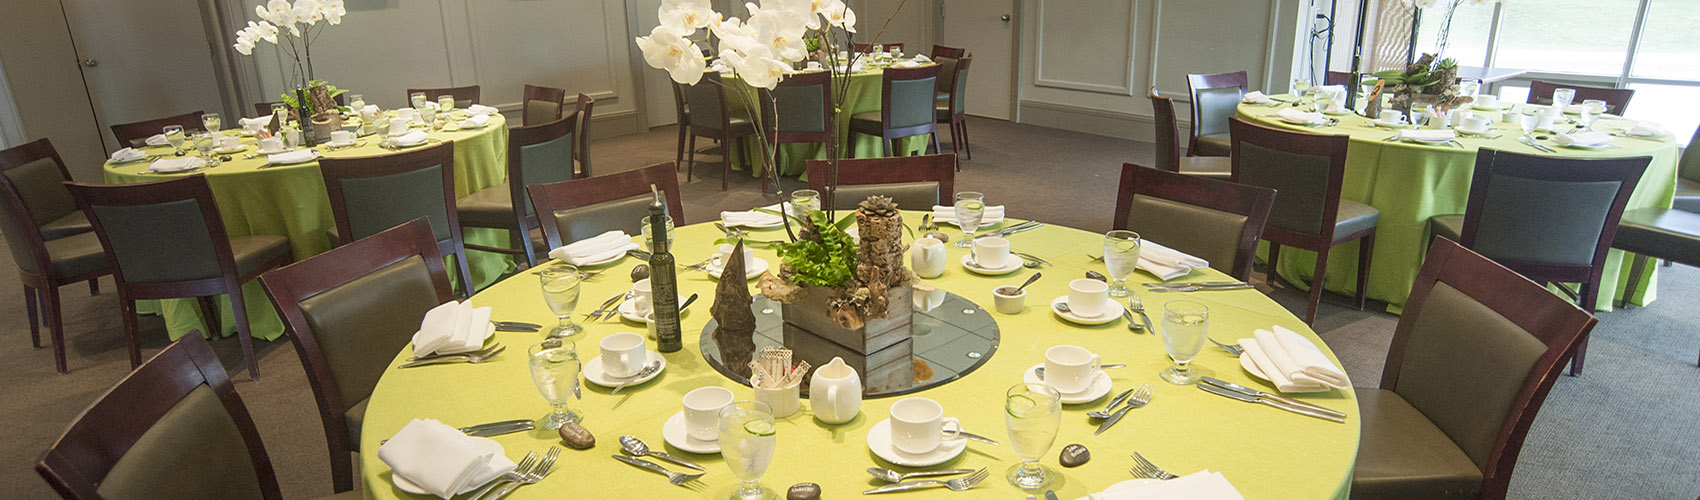 A dining table set for dinner service, with a green table cloth and an orchid flower centre piece